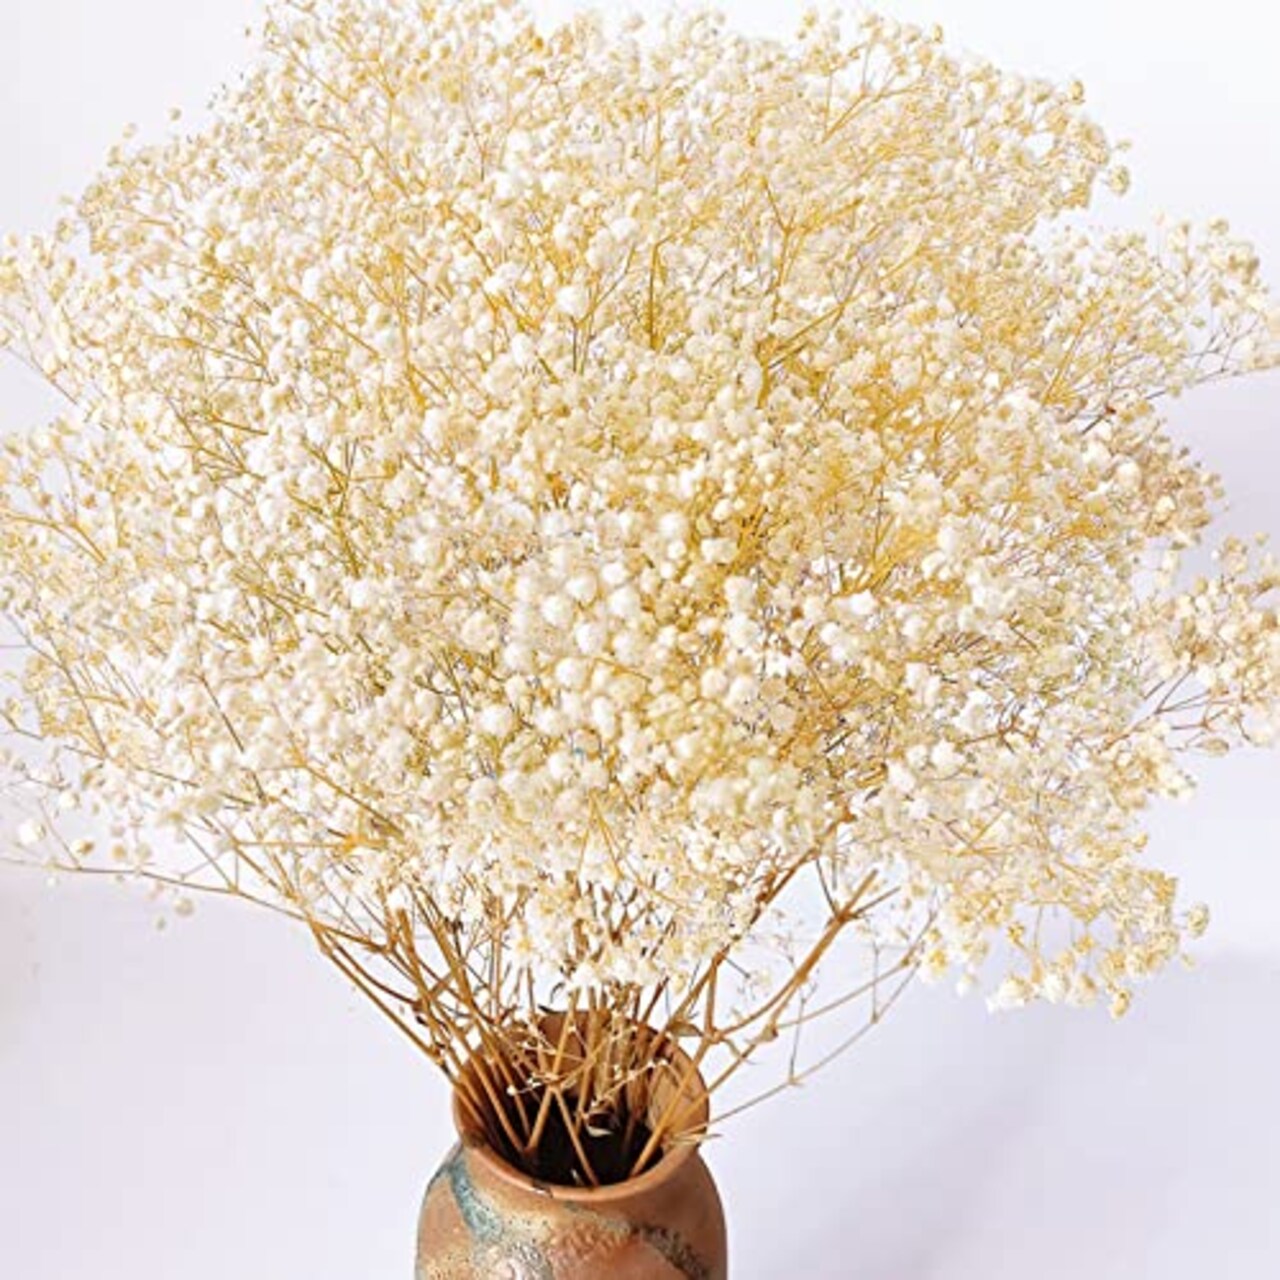 Dried-Babys-Breath-Flowers-Bouquet, Glicrili 17.2 inch 2500+ Ivory White  Flowers, Natural Gypsophila Branches for Home, Table Decor, Dry Flowers Bulk  for Vase, Wedding, DIY, Party (3oz)